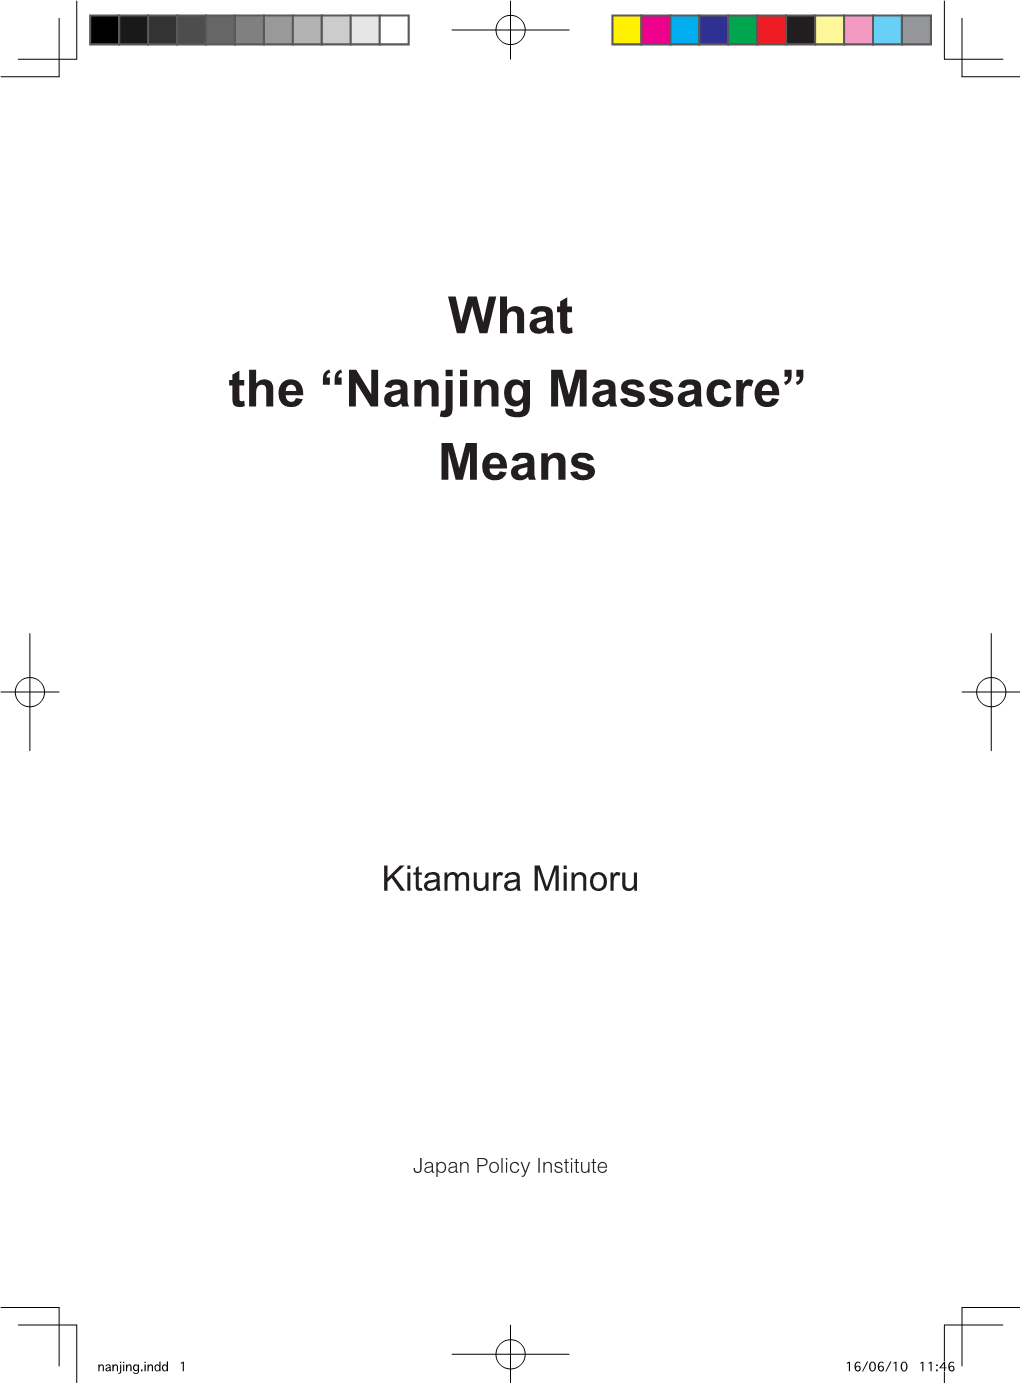 What the “Nanjing Massacre” Means